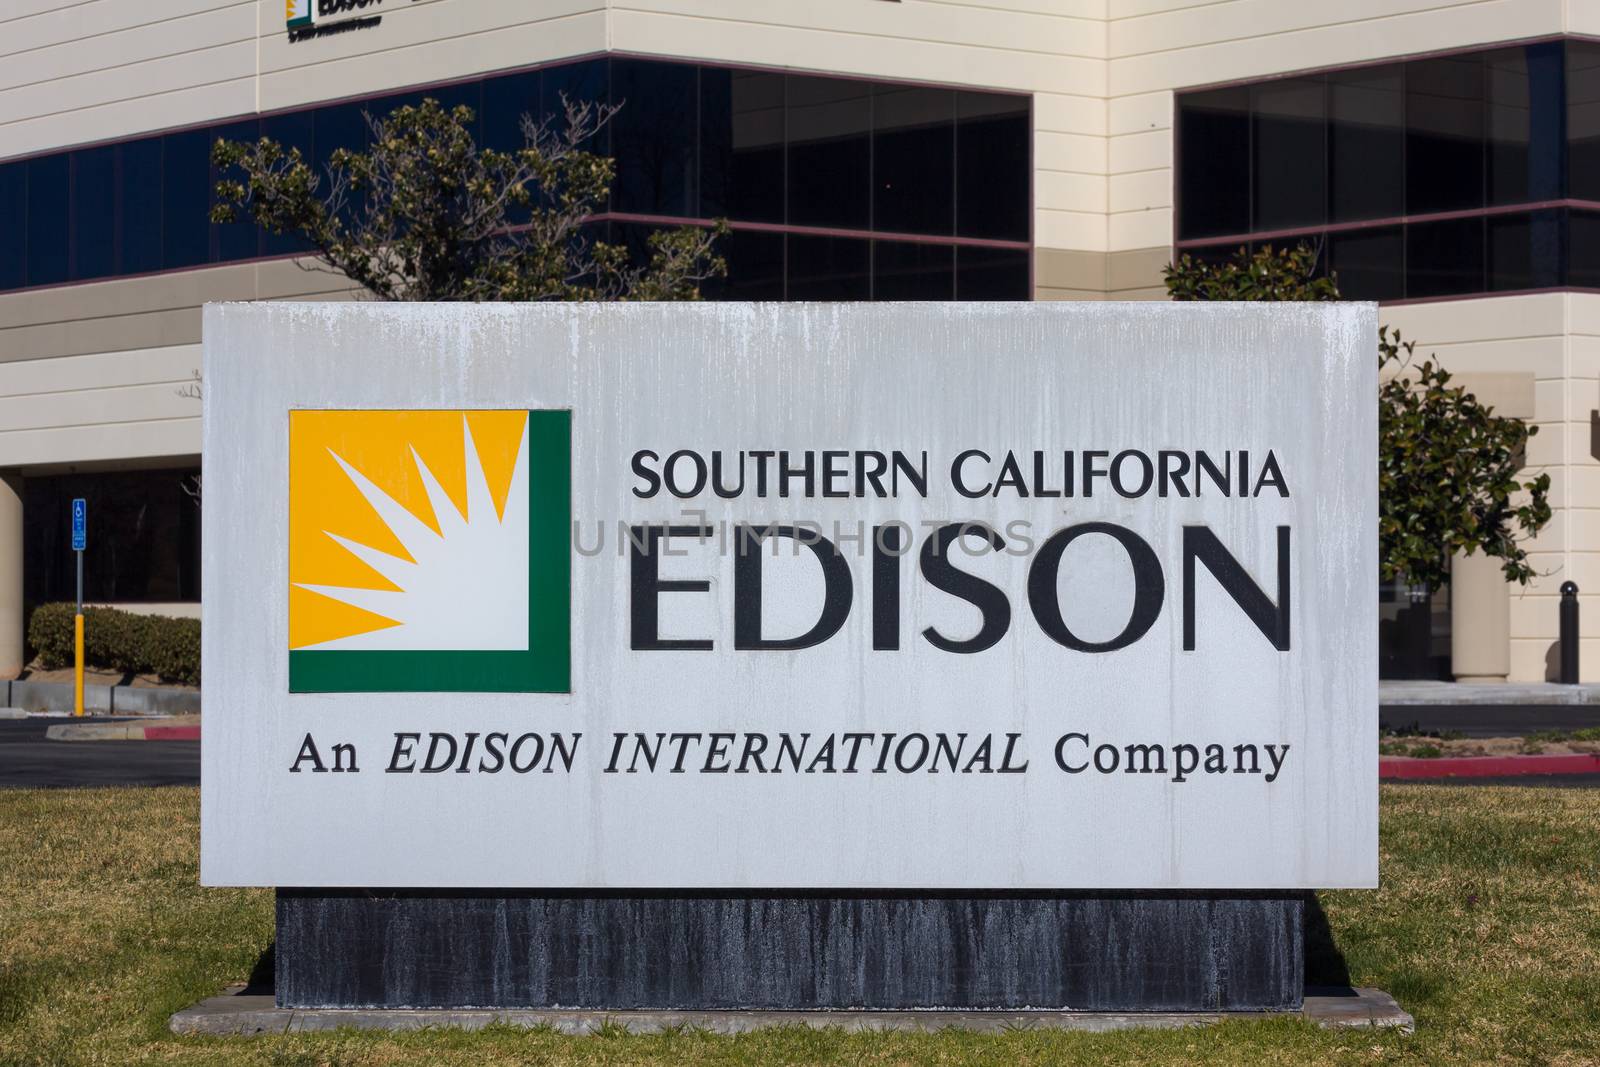 VALENCIA CA/USA - DECEMBER 26, 2015: Southern California Edison sign and logo. Southern California Edison is the primary electricity supplier for Southern California.